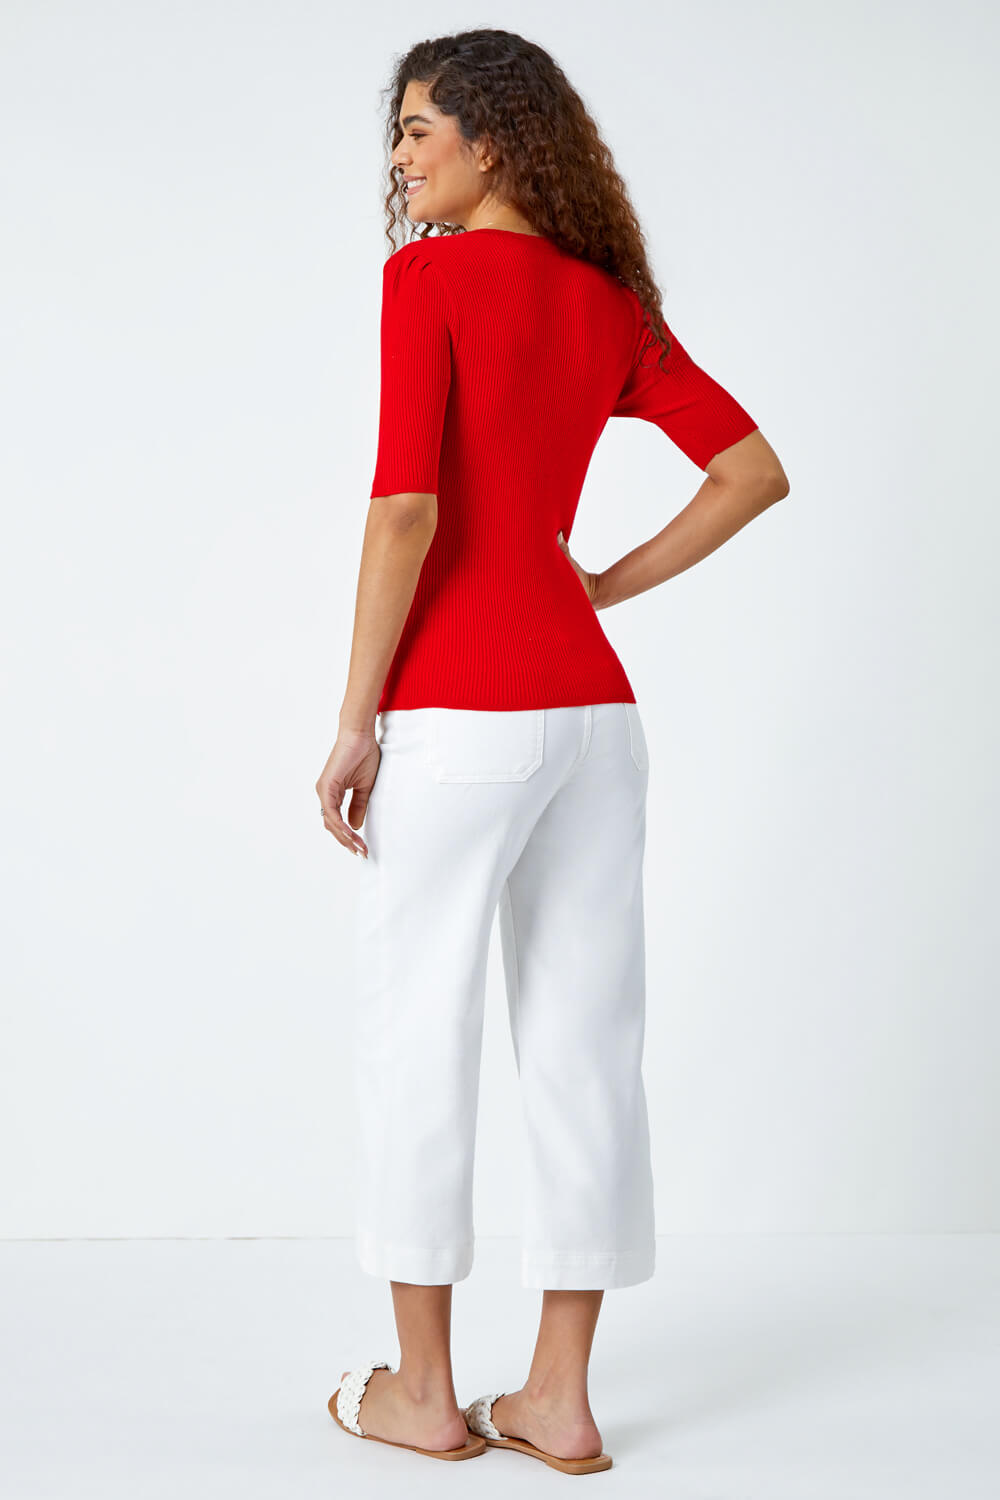 Red Scallop Edge Ribbed Stretch Knit Top, Image 3 of 5